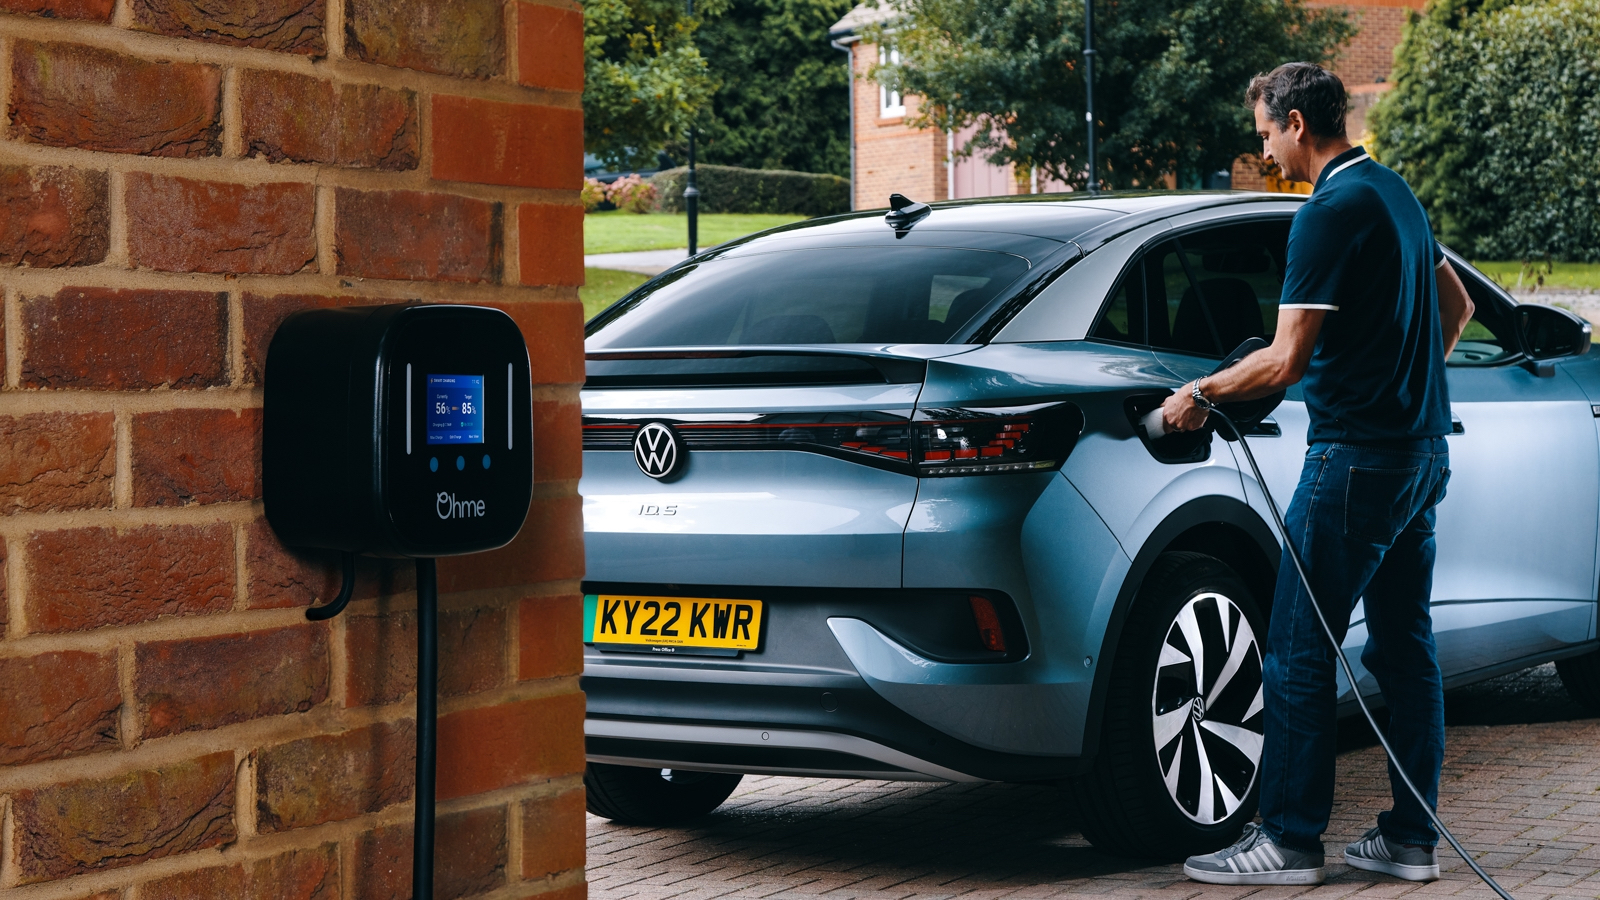 Ohme Home Pro EV charger plugging in Volkswagen ID5